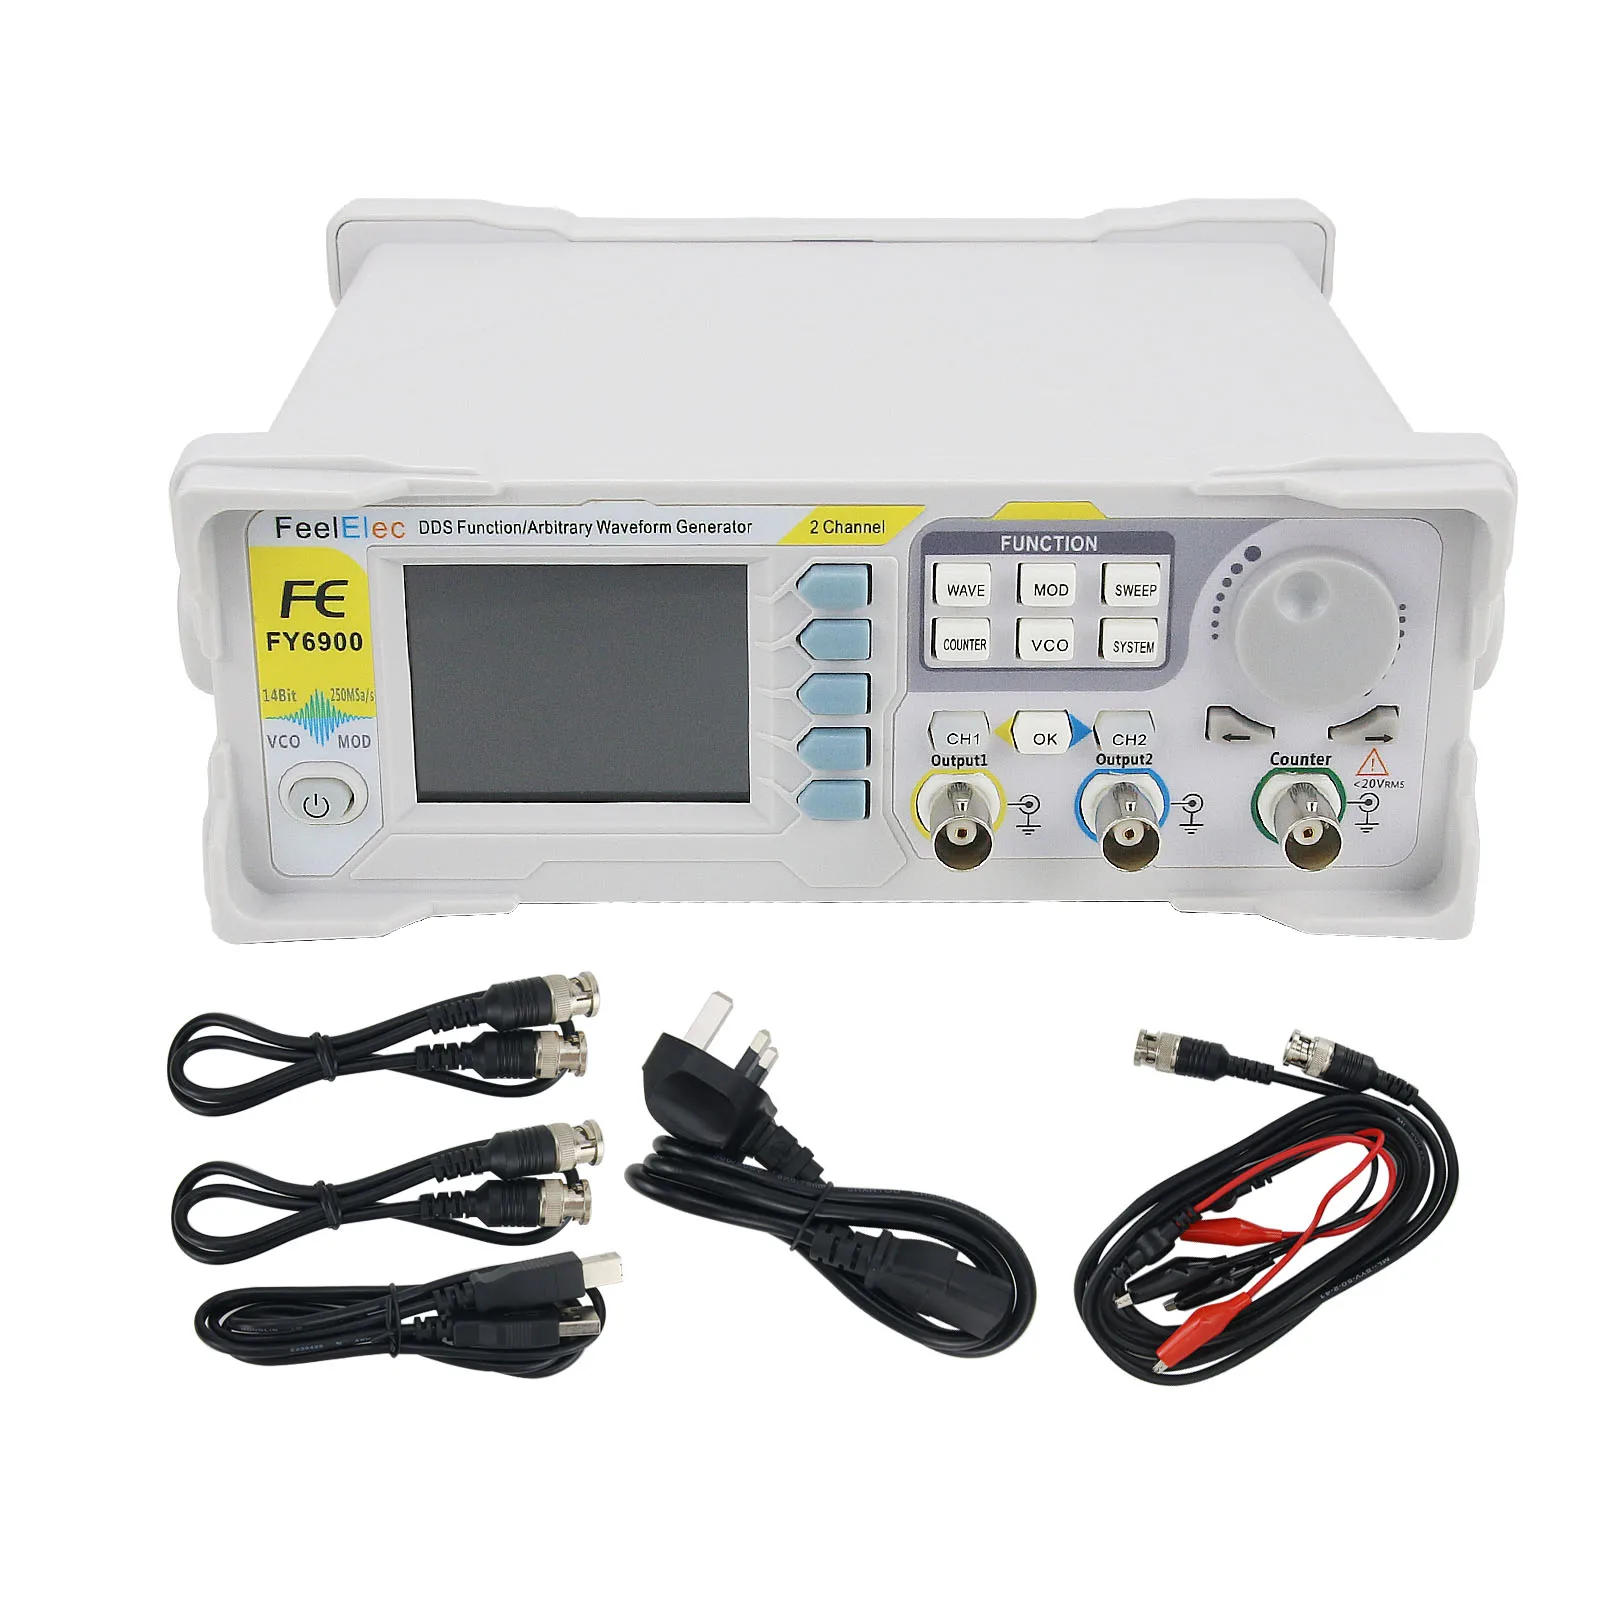 Function Signal Generator,KKmoon 100MHz Function Signal Generator High Precision DDS Signal Generator Counter Generator Pulse Signal Function Generator Frequency Meter 250MSa/s 